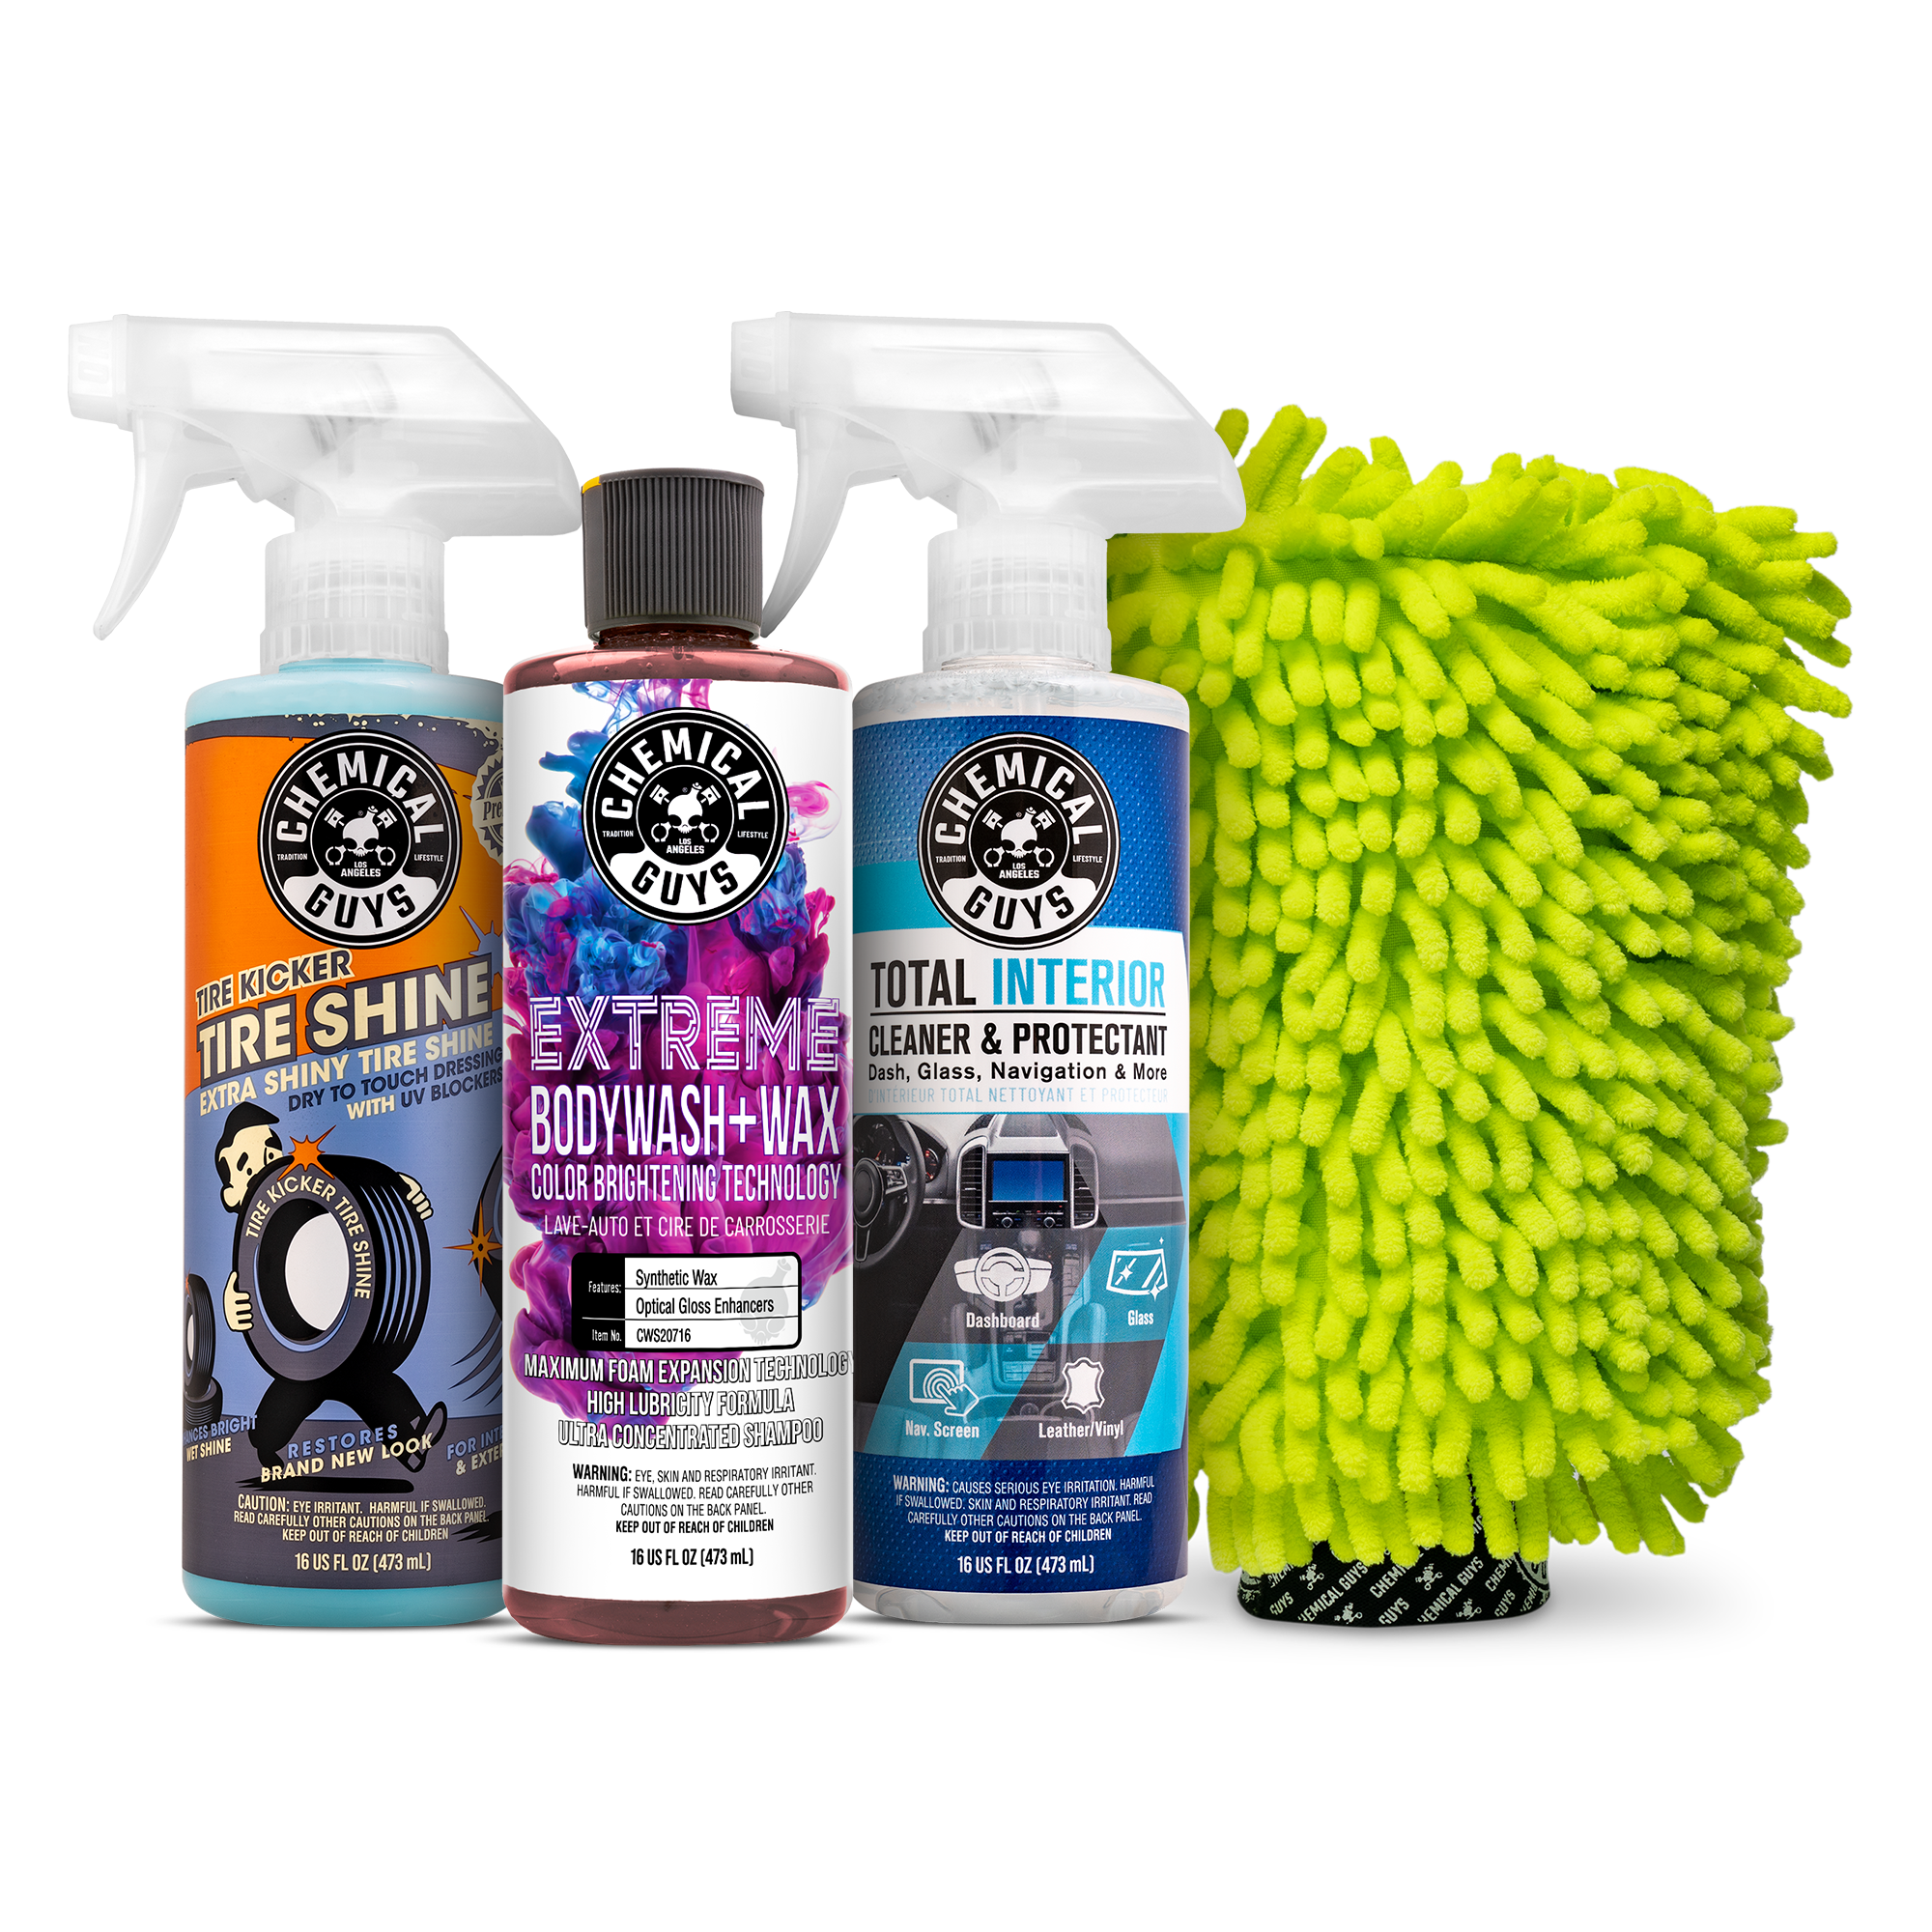 Car Cleaning Chemicals, Detailing Cleaners, & More